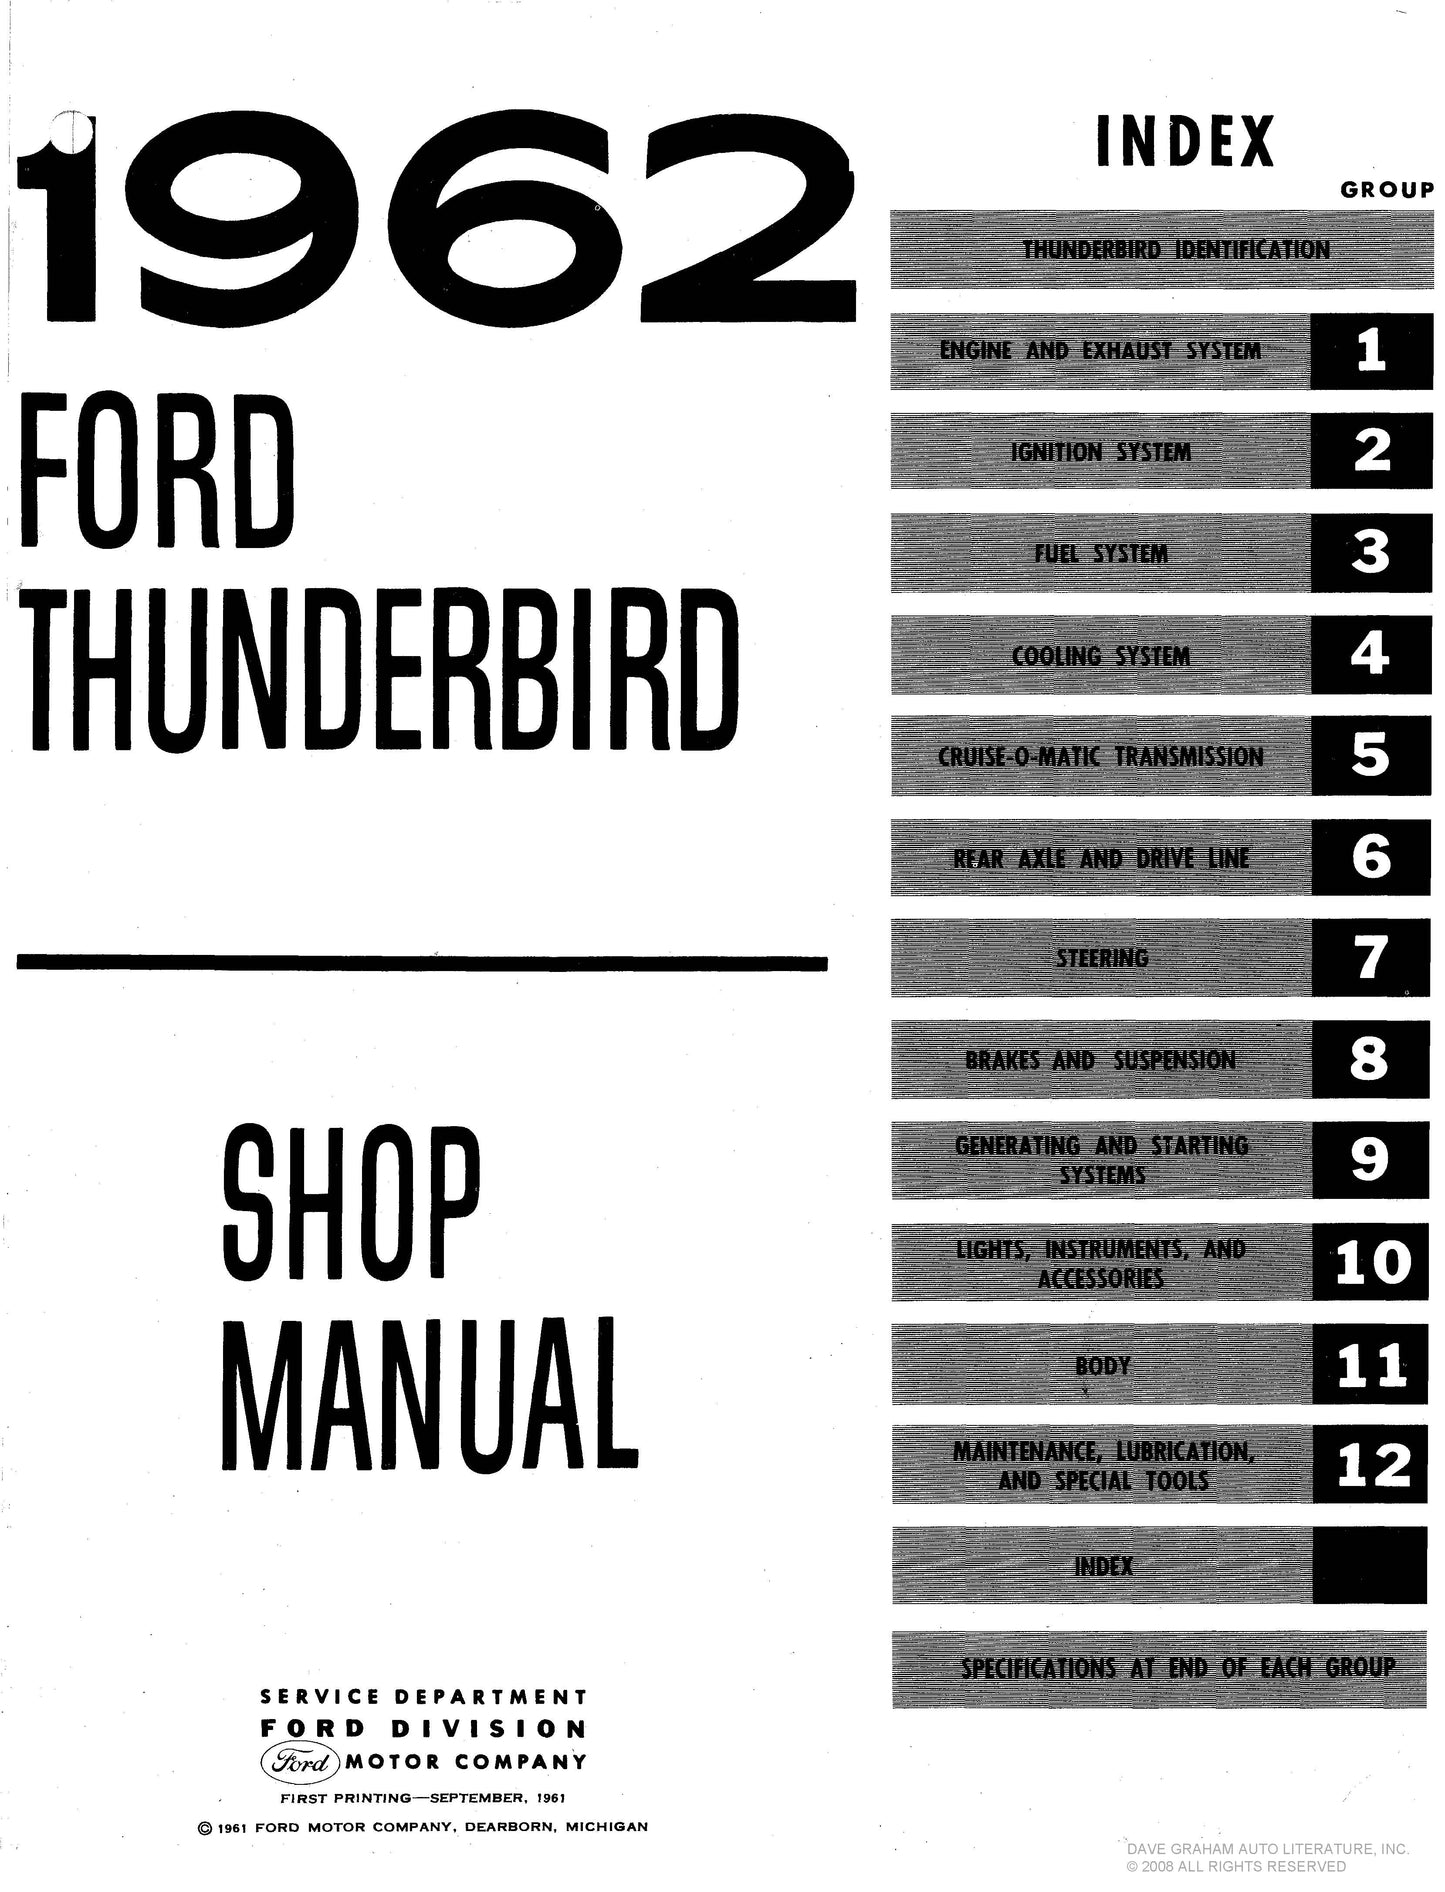 1961-1963 Ford Truck - Shop Manual